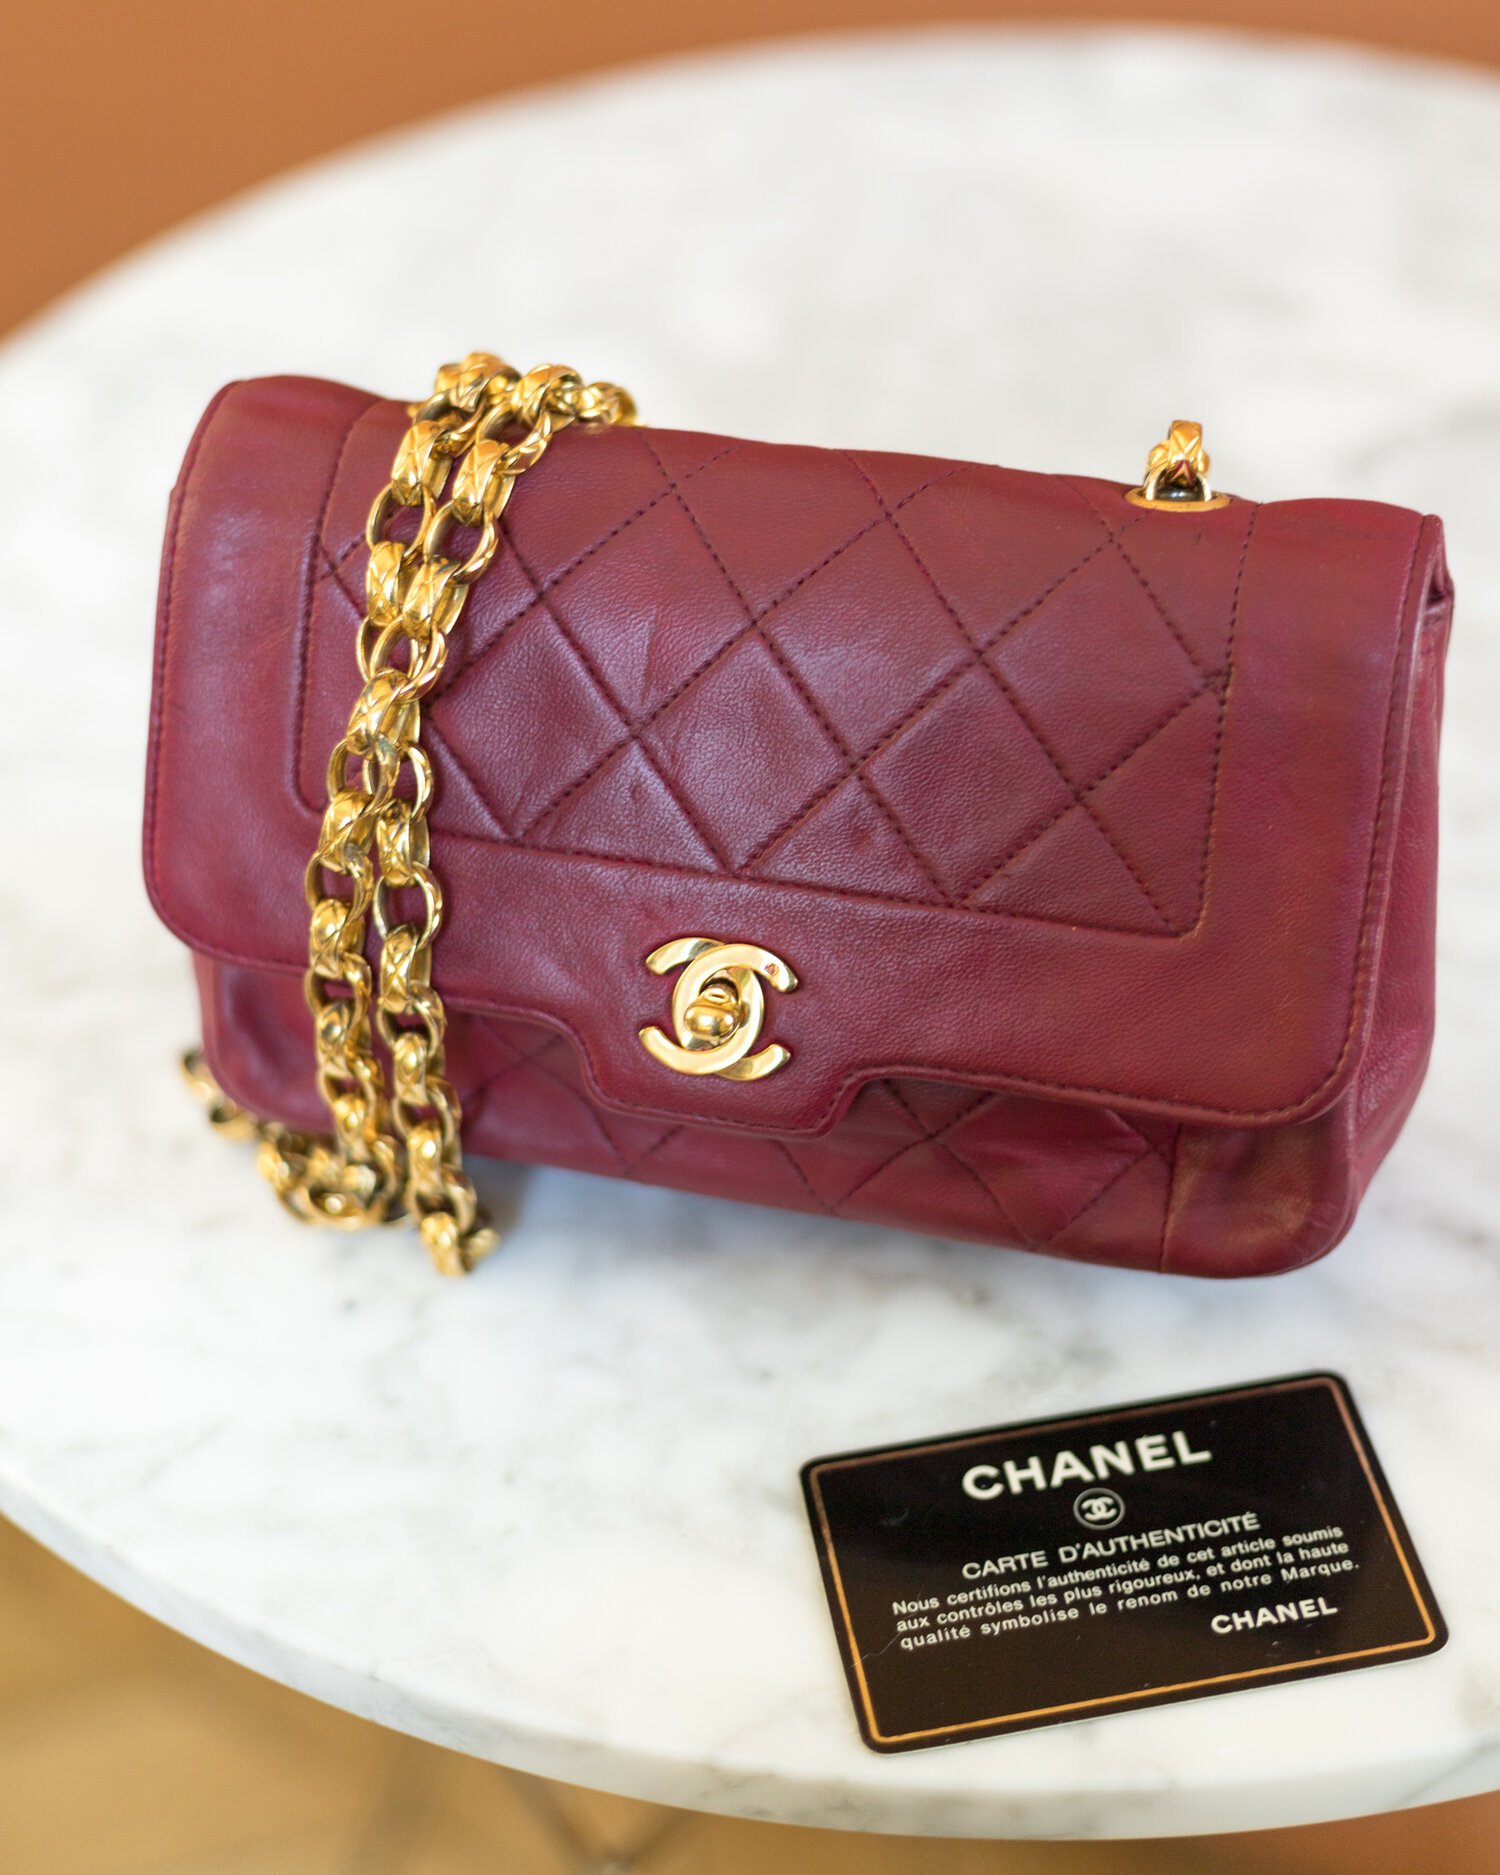 CHANEL, Bags, Rare Vintage Chanel Pink Diana Classic Flap Bag